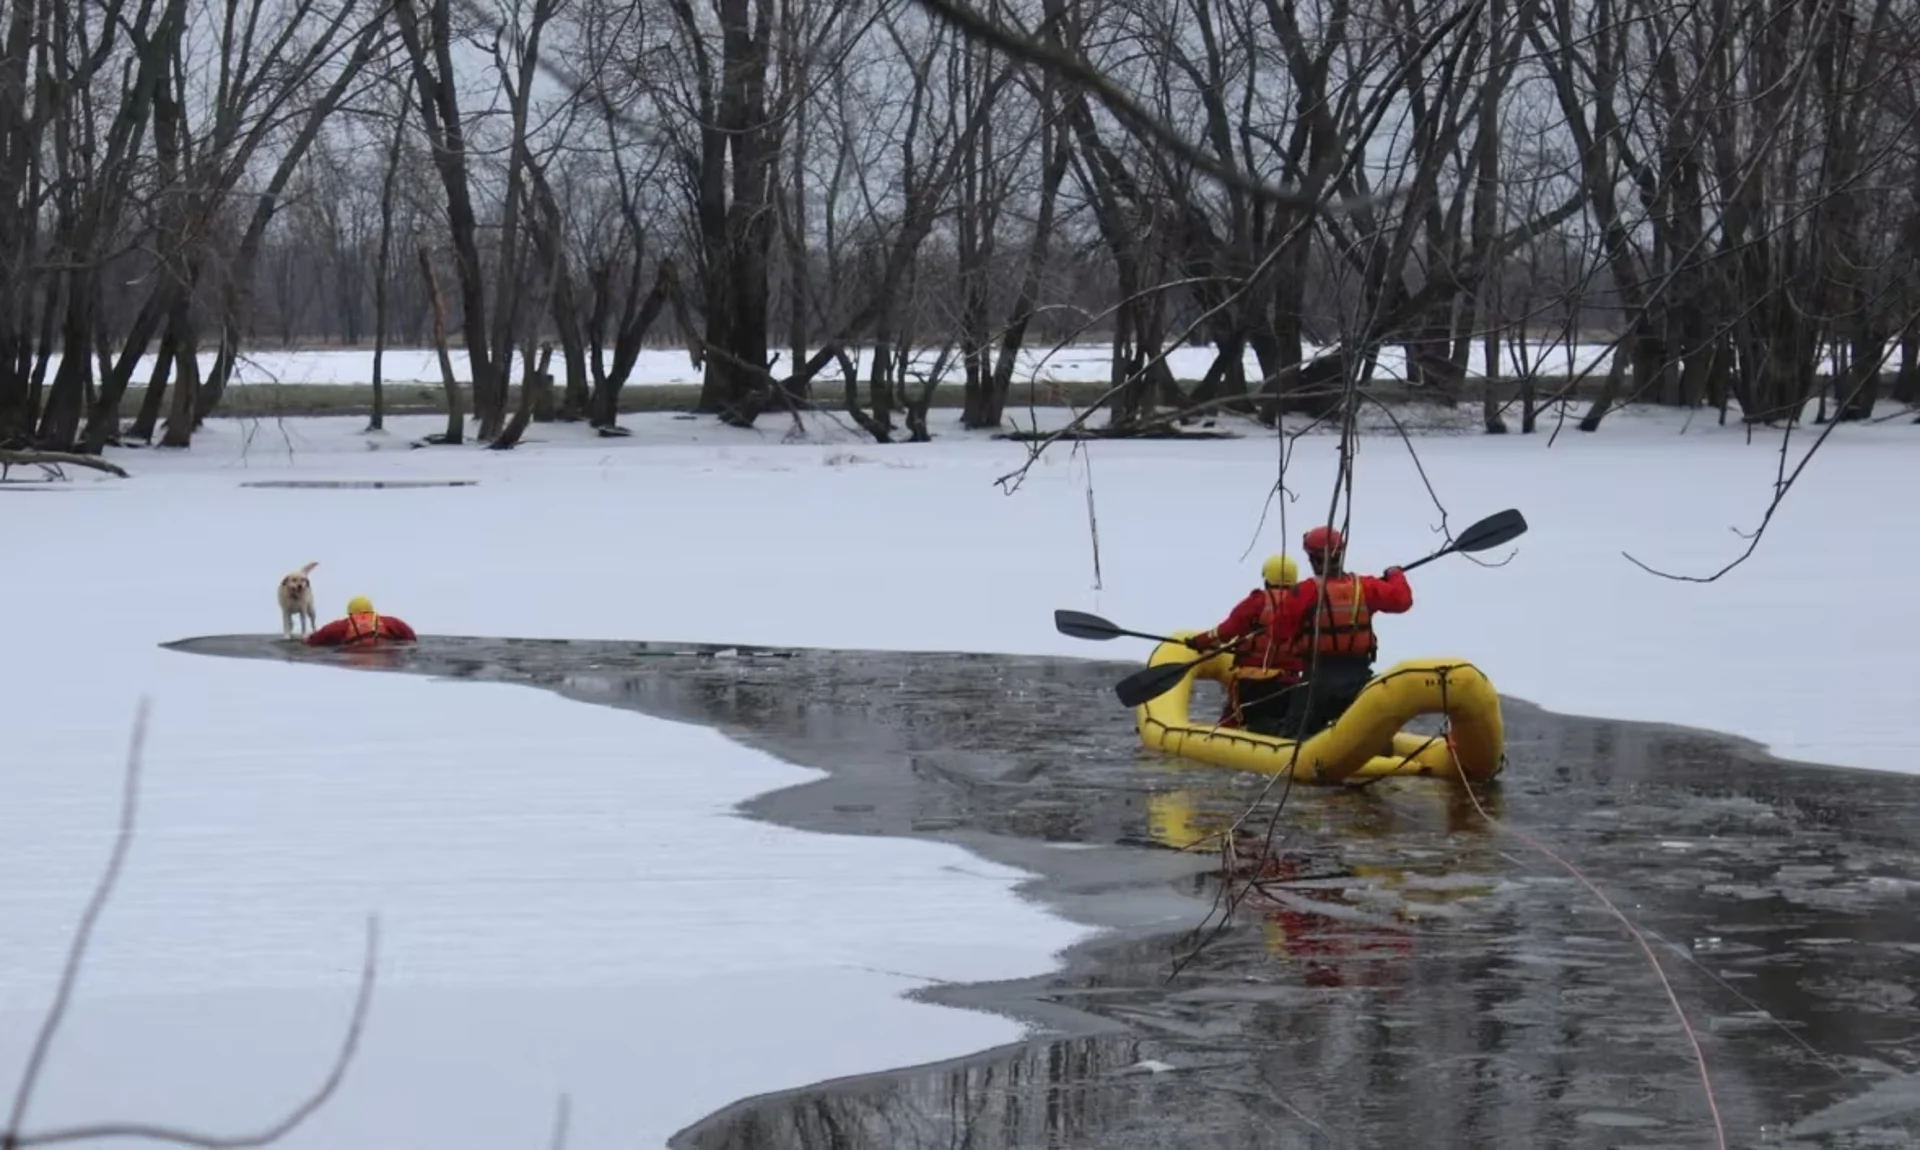 Dramatic dog rescue a reminder of ice safety amid rapidly changing weather